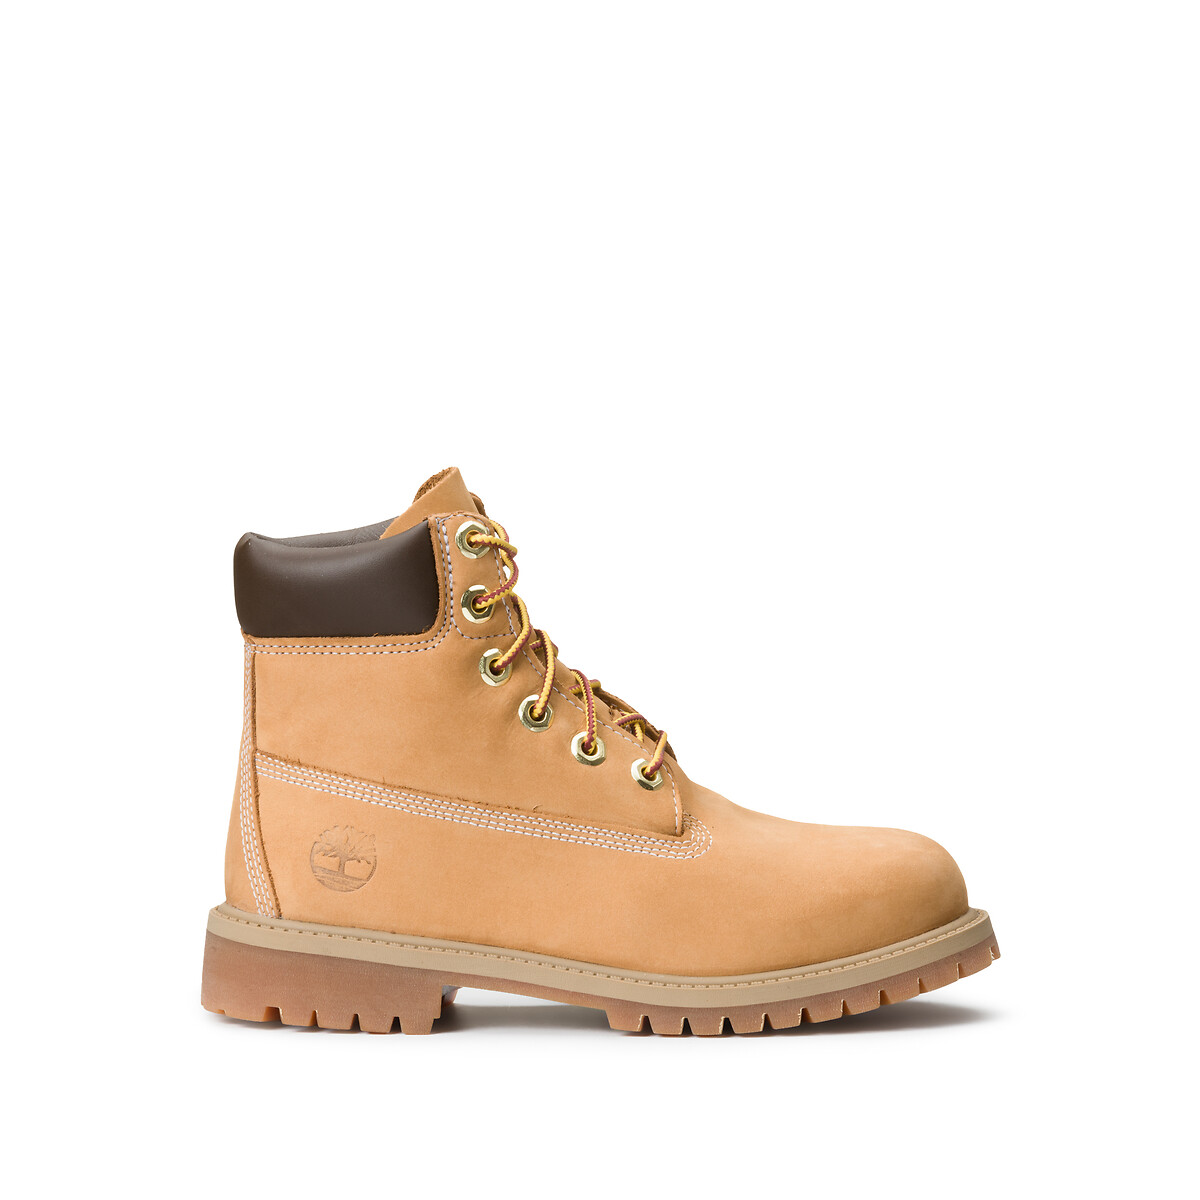 Image of Kids 6 In Premium WP Ankle Boots in Nubuck